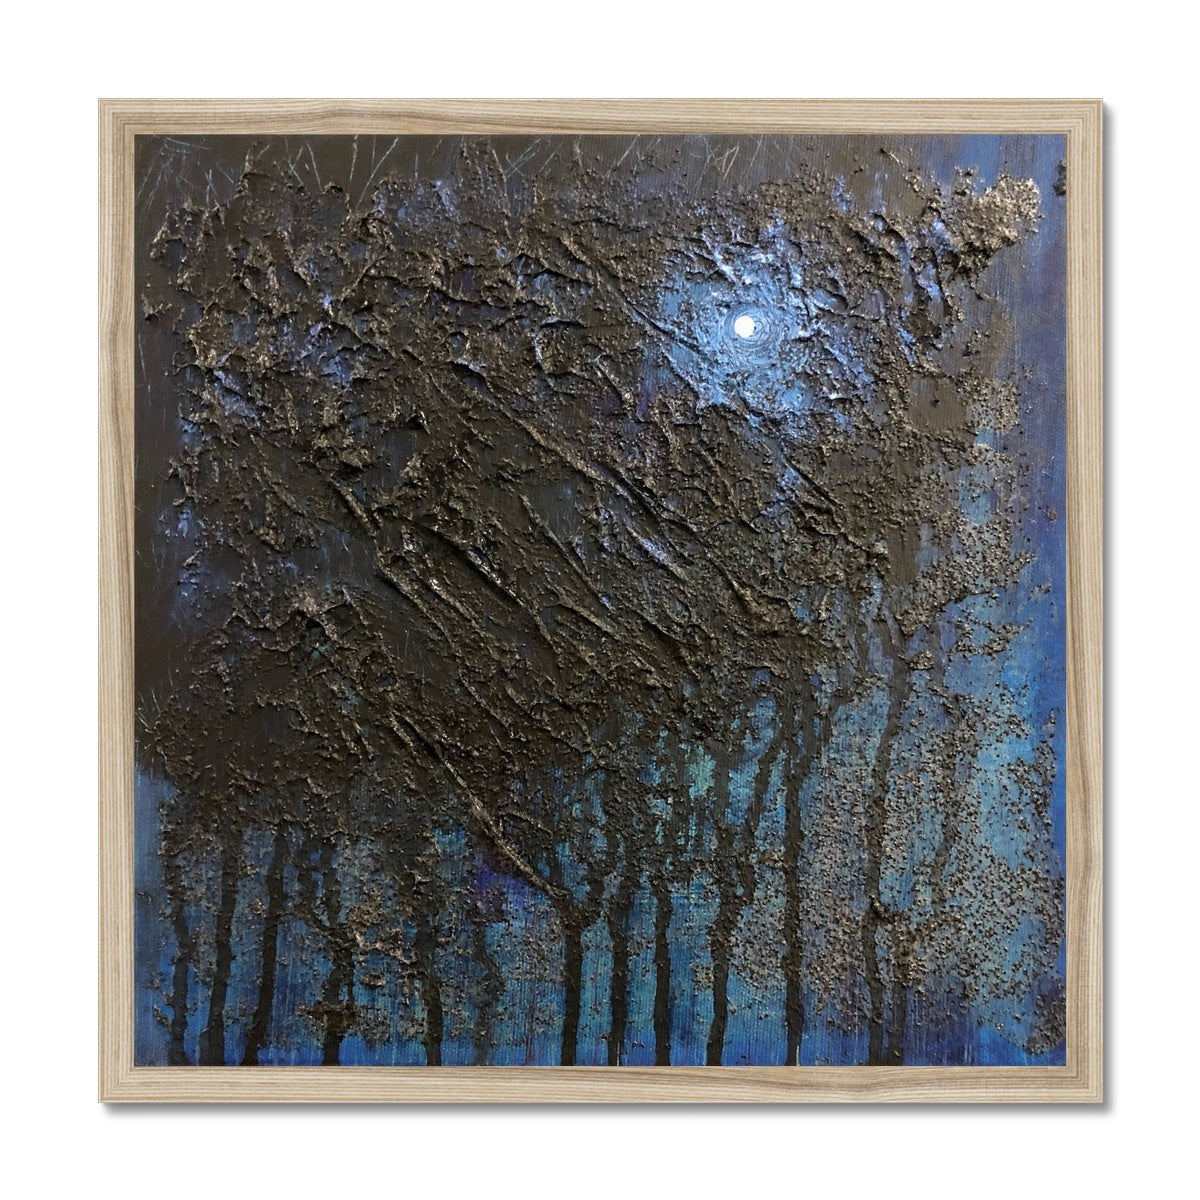 The Blue Moon Wood Abstract Painting | Framed Prints From Scotland-Framed Prints-Abstract & Impressionistic Art Gallery-20"x20"-Natural Frame-Paintings, Prints, Homeware, Art Gifts From Scotland By Scottish Artist Kevin Hunter